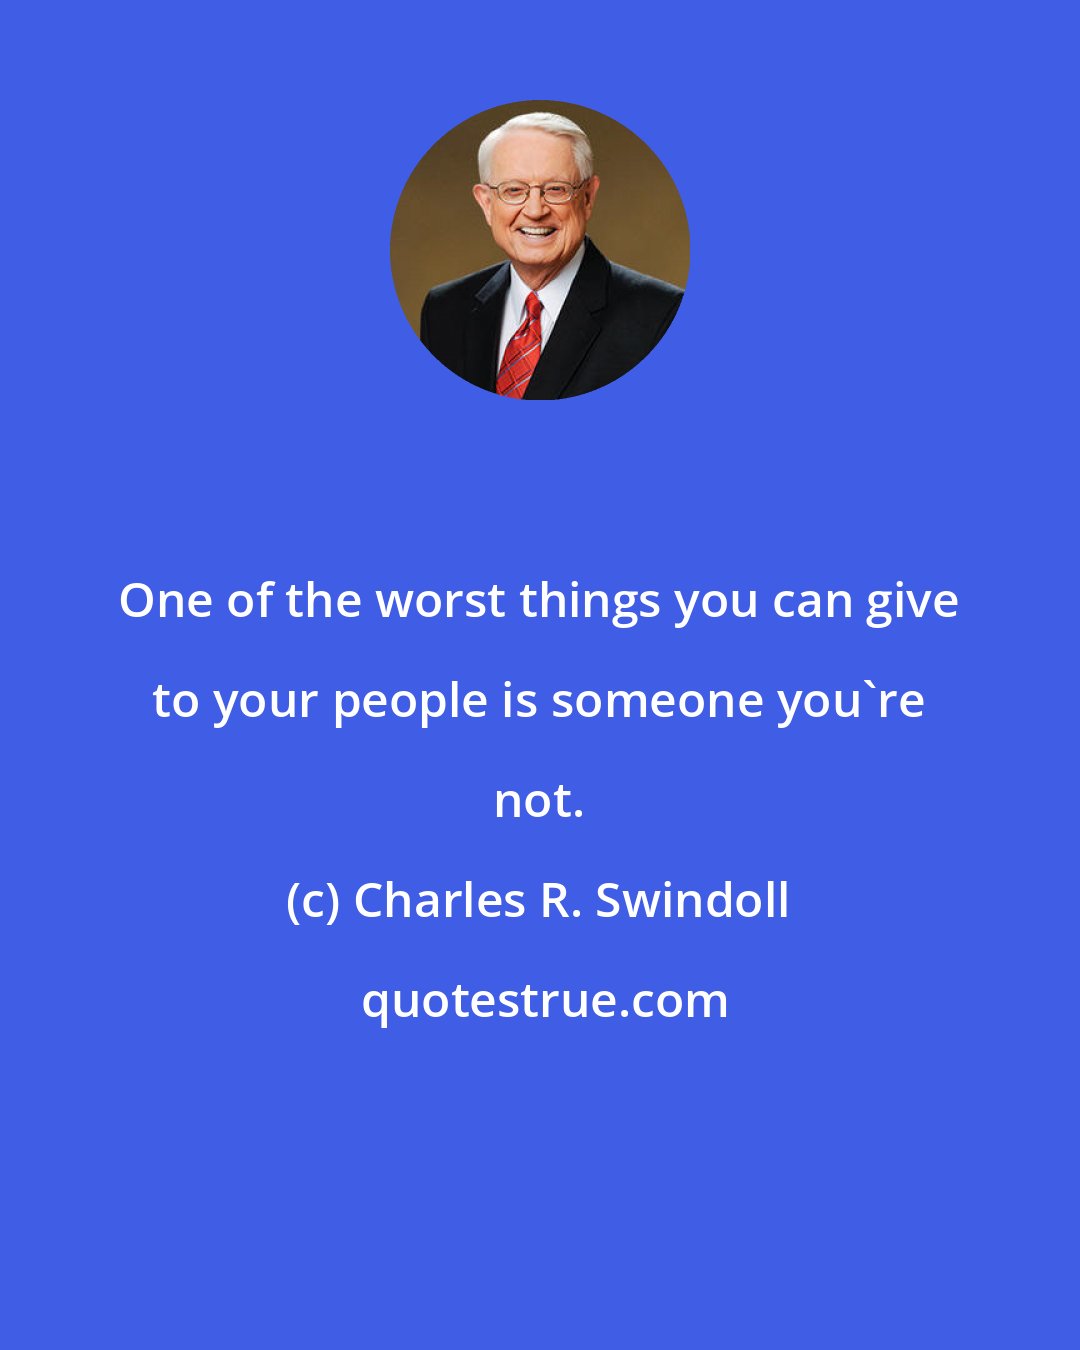 Charles R. Swindoll: One of the worst things you can give to your people is someone you're not.